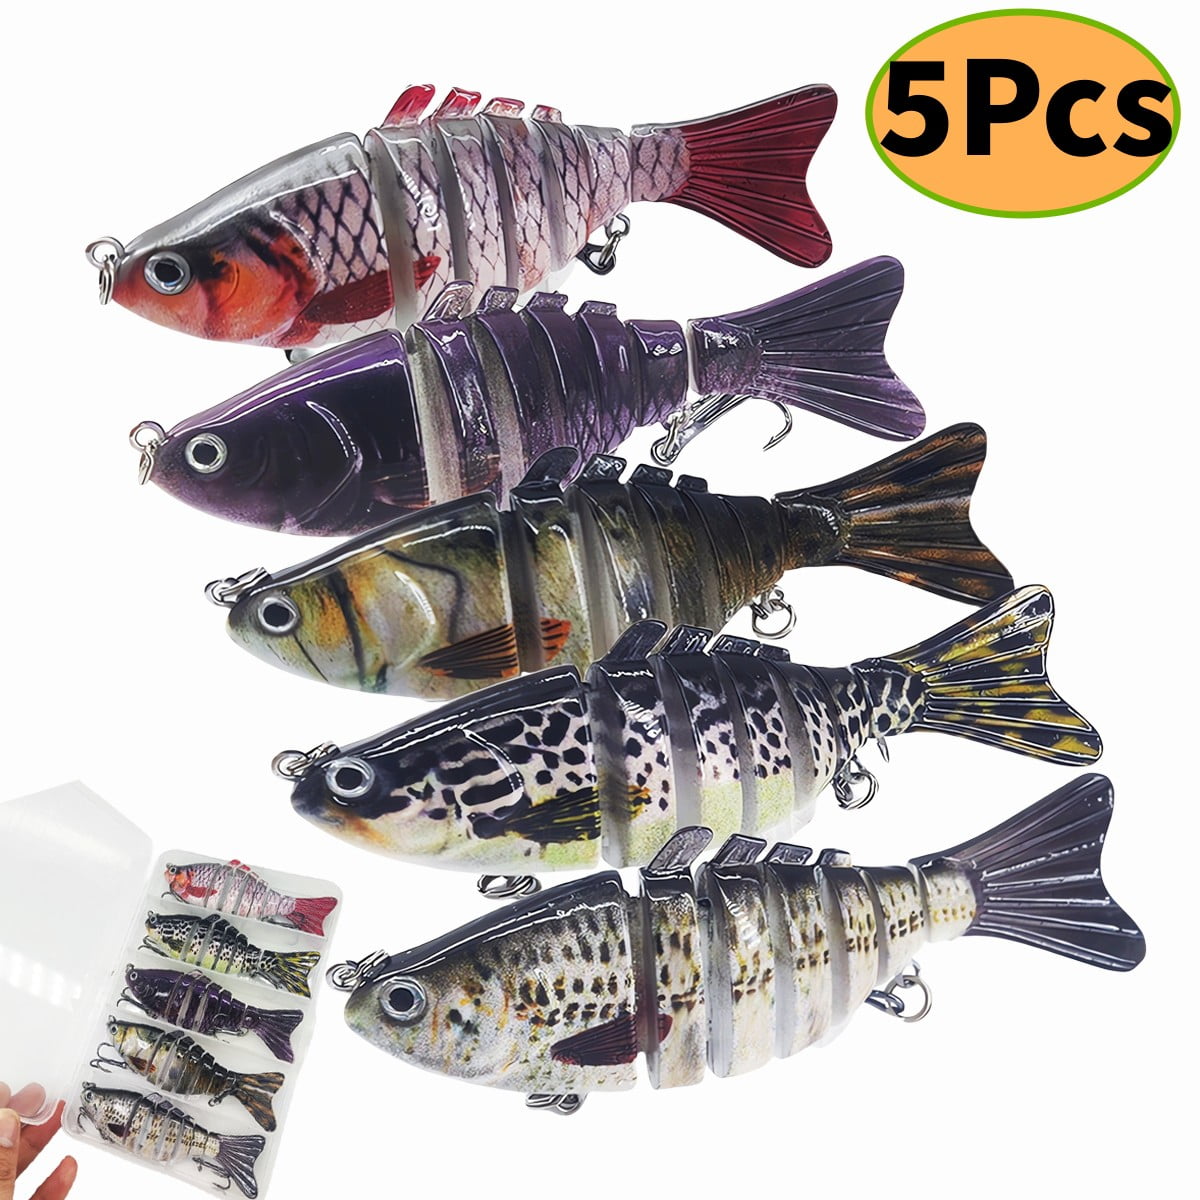 Bass Pro Shops Tournament Series Fishing Assortment Kit Lures Worms 